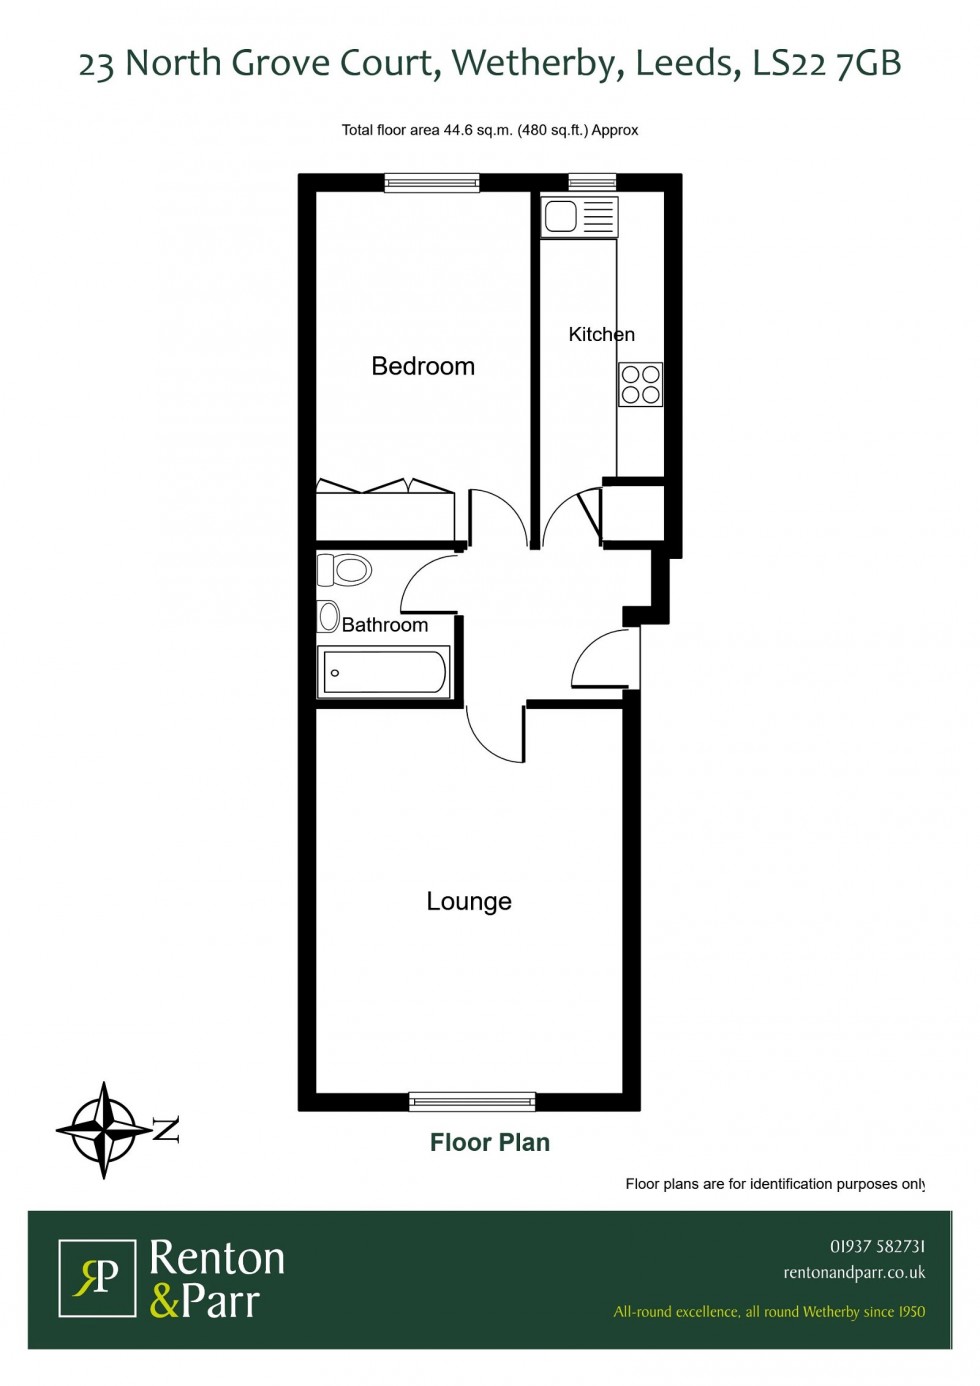 Floorplan for Wetherby, North Grove Court, LS22